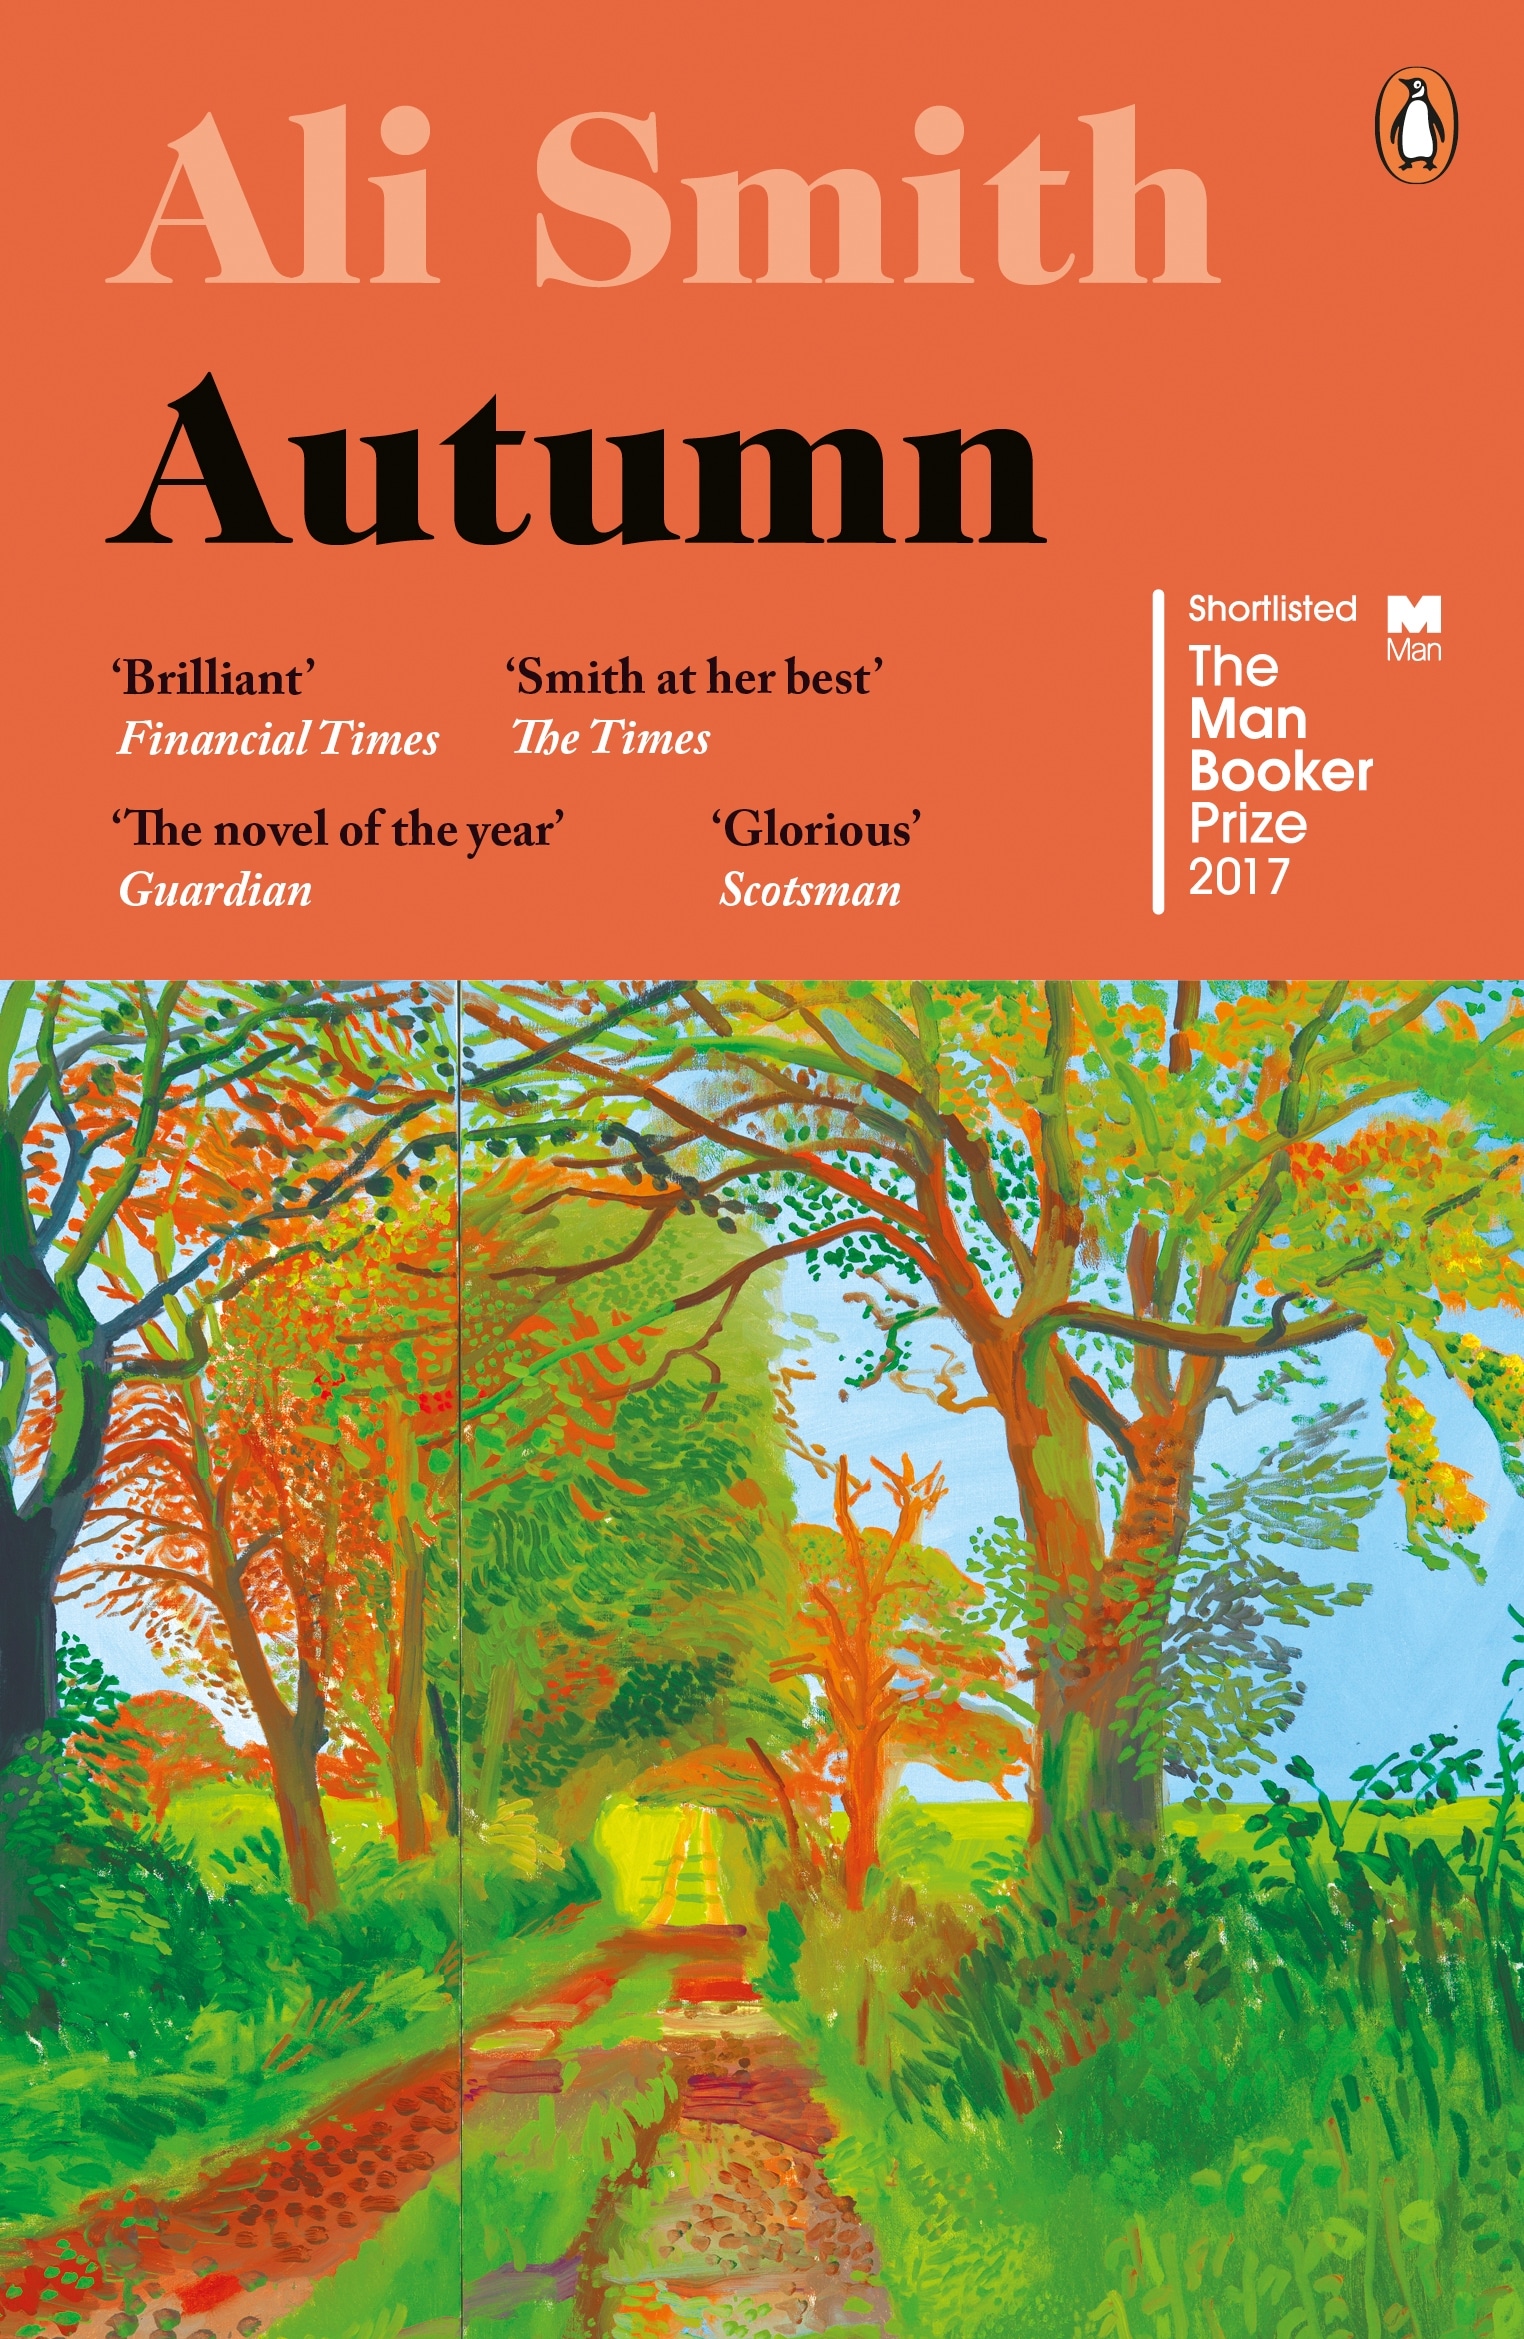 Book “Autumn” by Ali Smith — August 31, 2017